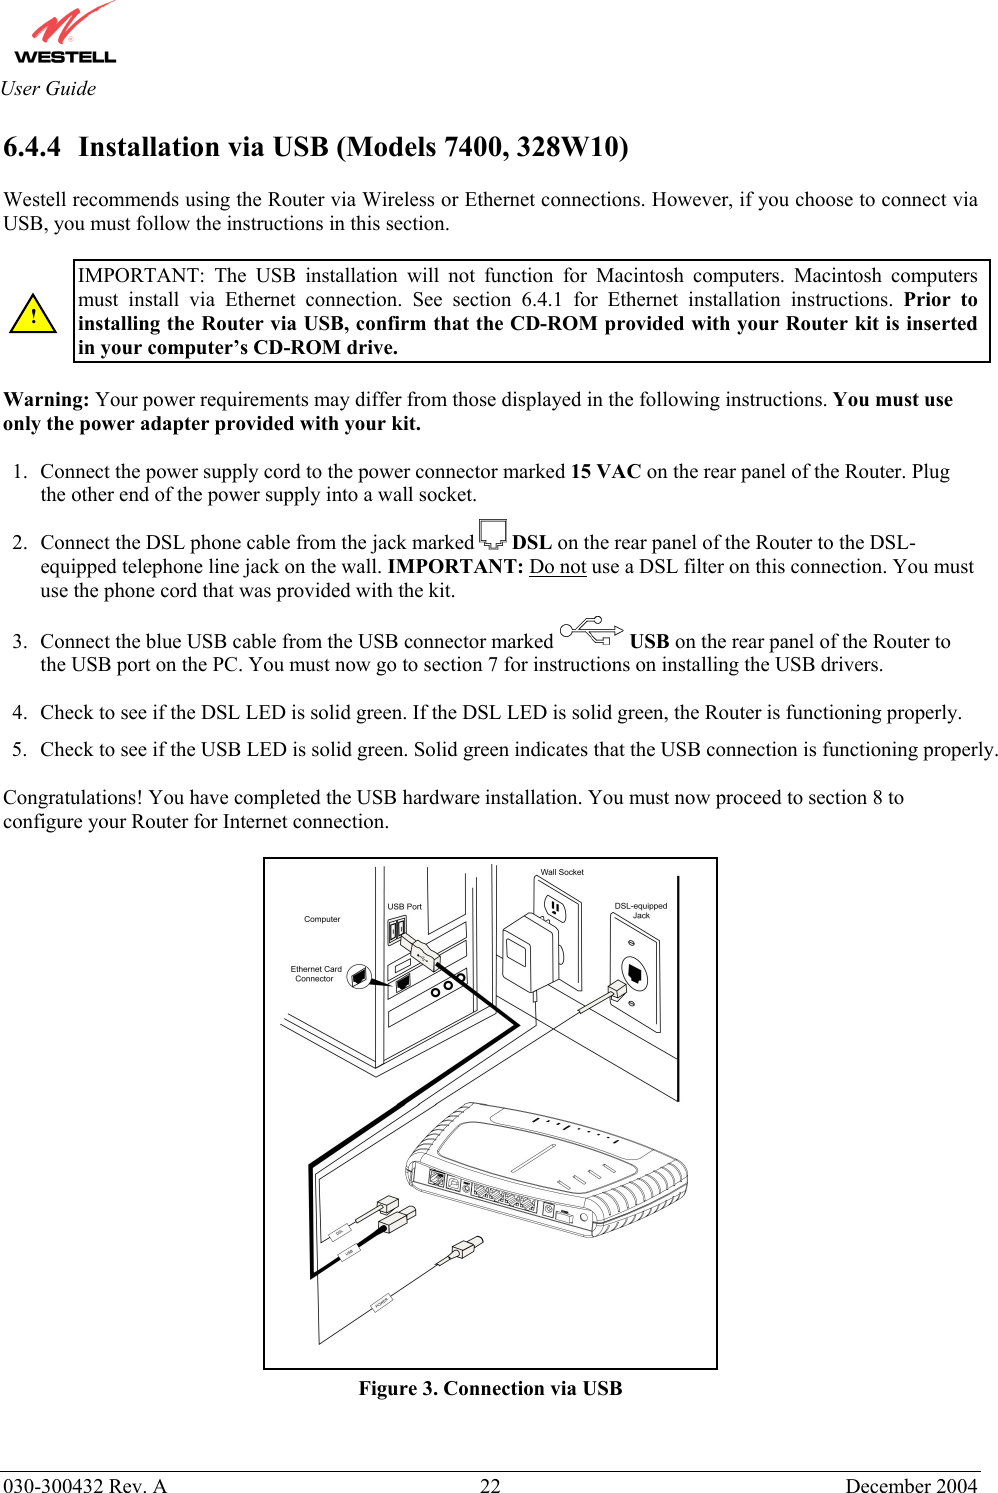       030-300432 Rev. A  22 December 2004  User Guide 6.4.4  Installation via USB (Models 7400, 328W10)  Westell recommends using the Router via Wireless or Ethernet connections. However, if you choose to connect via USB, you must follow the instructions in this section.   IMPORTANT: The USB installation will not function for Macintosh computers. Macintosh computers must install via Ethernet connection. See section 6.4.1 for Ethernet installation instructions. Prior to installing the Router via USB, confirm that the CD-ROM provided with your Router kit is inserted in your computer’s CD-ROM drive.  Warning: Your power requirements may differ from those displayed in the following instructions. You must use only the power adapter provided with your kit.   1.  Connect the power supply cord to the power connector marked 15 VAC on the rear panel of the Router. Plug the other end of the power supply into a wall socket. 2.  Connect the DSL phone cable from the jack marked   DSL on the rear panel of the Router to the DSL-equipped telephone line jack on the wall. IMPORTANT: Do not use a DSL filter on this connection. You must use the phone cord that was provided with the kit. 3.  Connect the blue USB cable from the USB connector marked USB on the rear panel of the Router to the USB port on the PC. You must now go to section 7 for instructions on installing the USB drivers.  4.  Check to see if the DSL LED is solid green. If the DSL LED is solid green, the Router is functioning properly. 5.  Check to see if the USB LED is solid green. Solid green indicates that the USB connection is functioning properly.  Congratulations! You have completed the USB hardware installation. You must now proceed to section 8 to configure your Router for Internet connection.   Figure 3. Connection via USB ! 